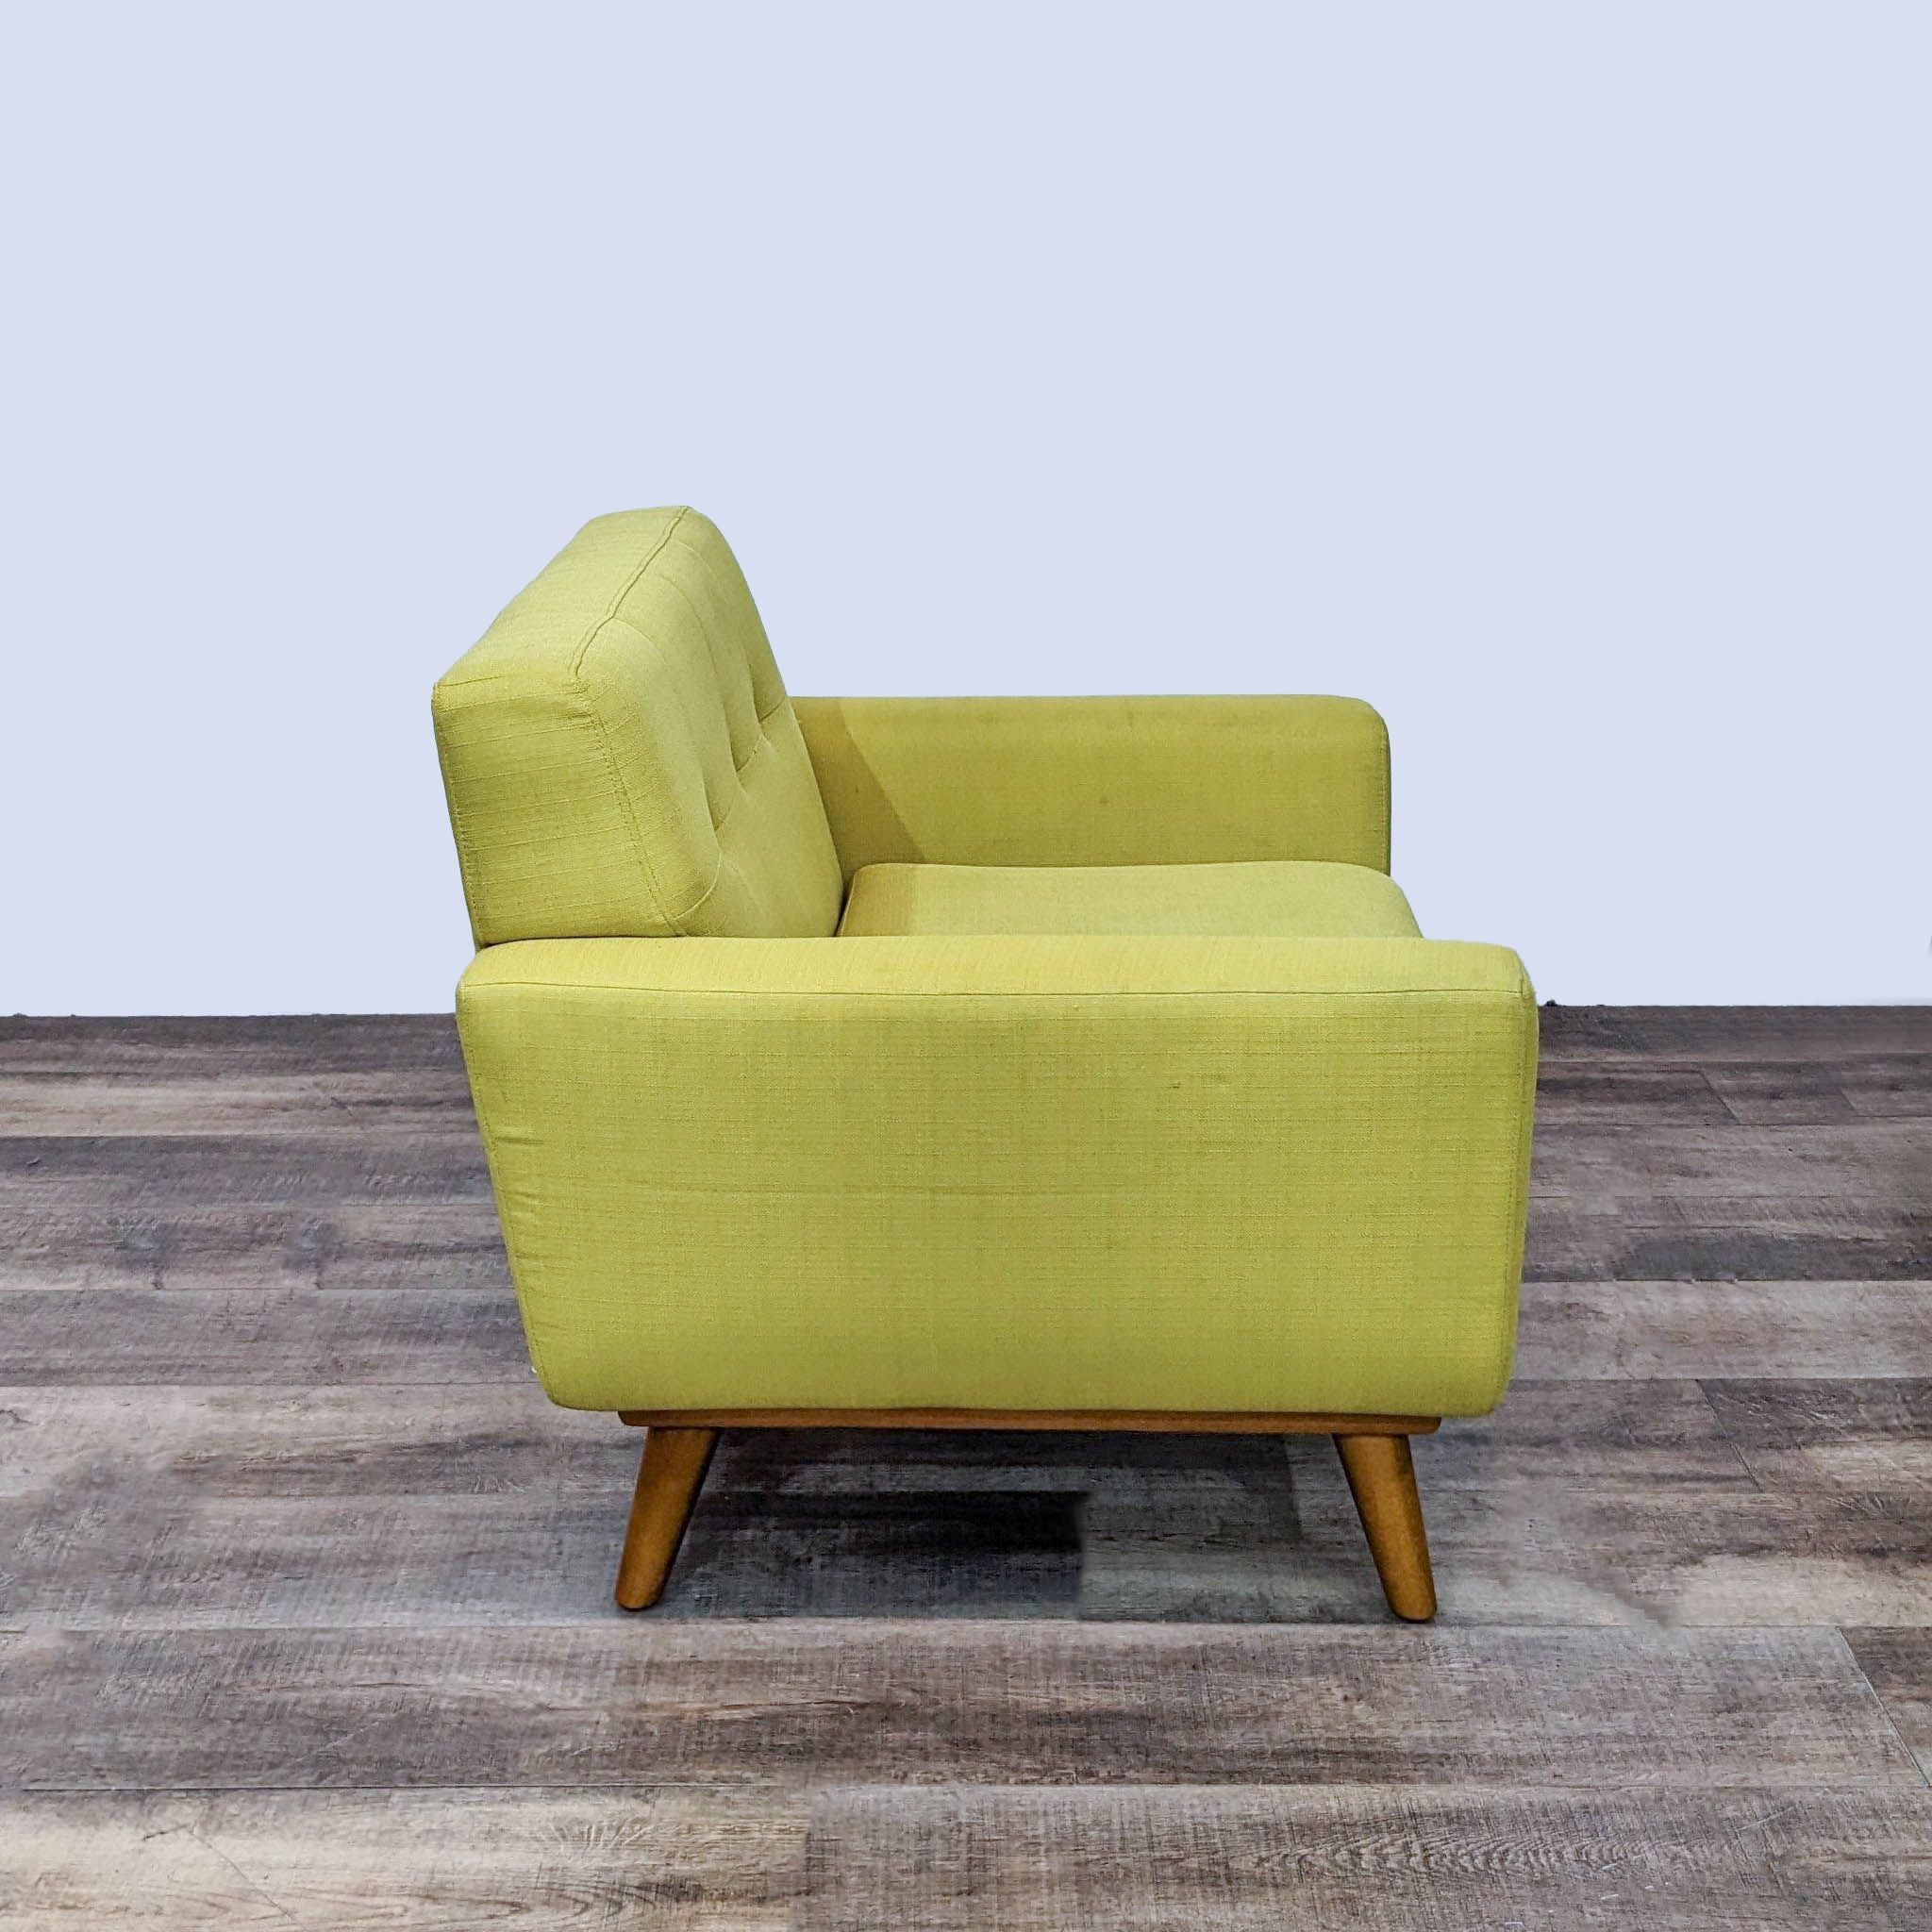 Mustard yellow Modway Engage armchair displaying button-tufted detailing and tapered wood legs, showcasing mid-century style.